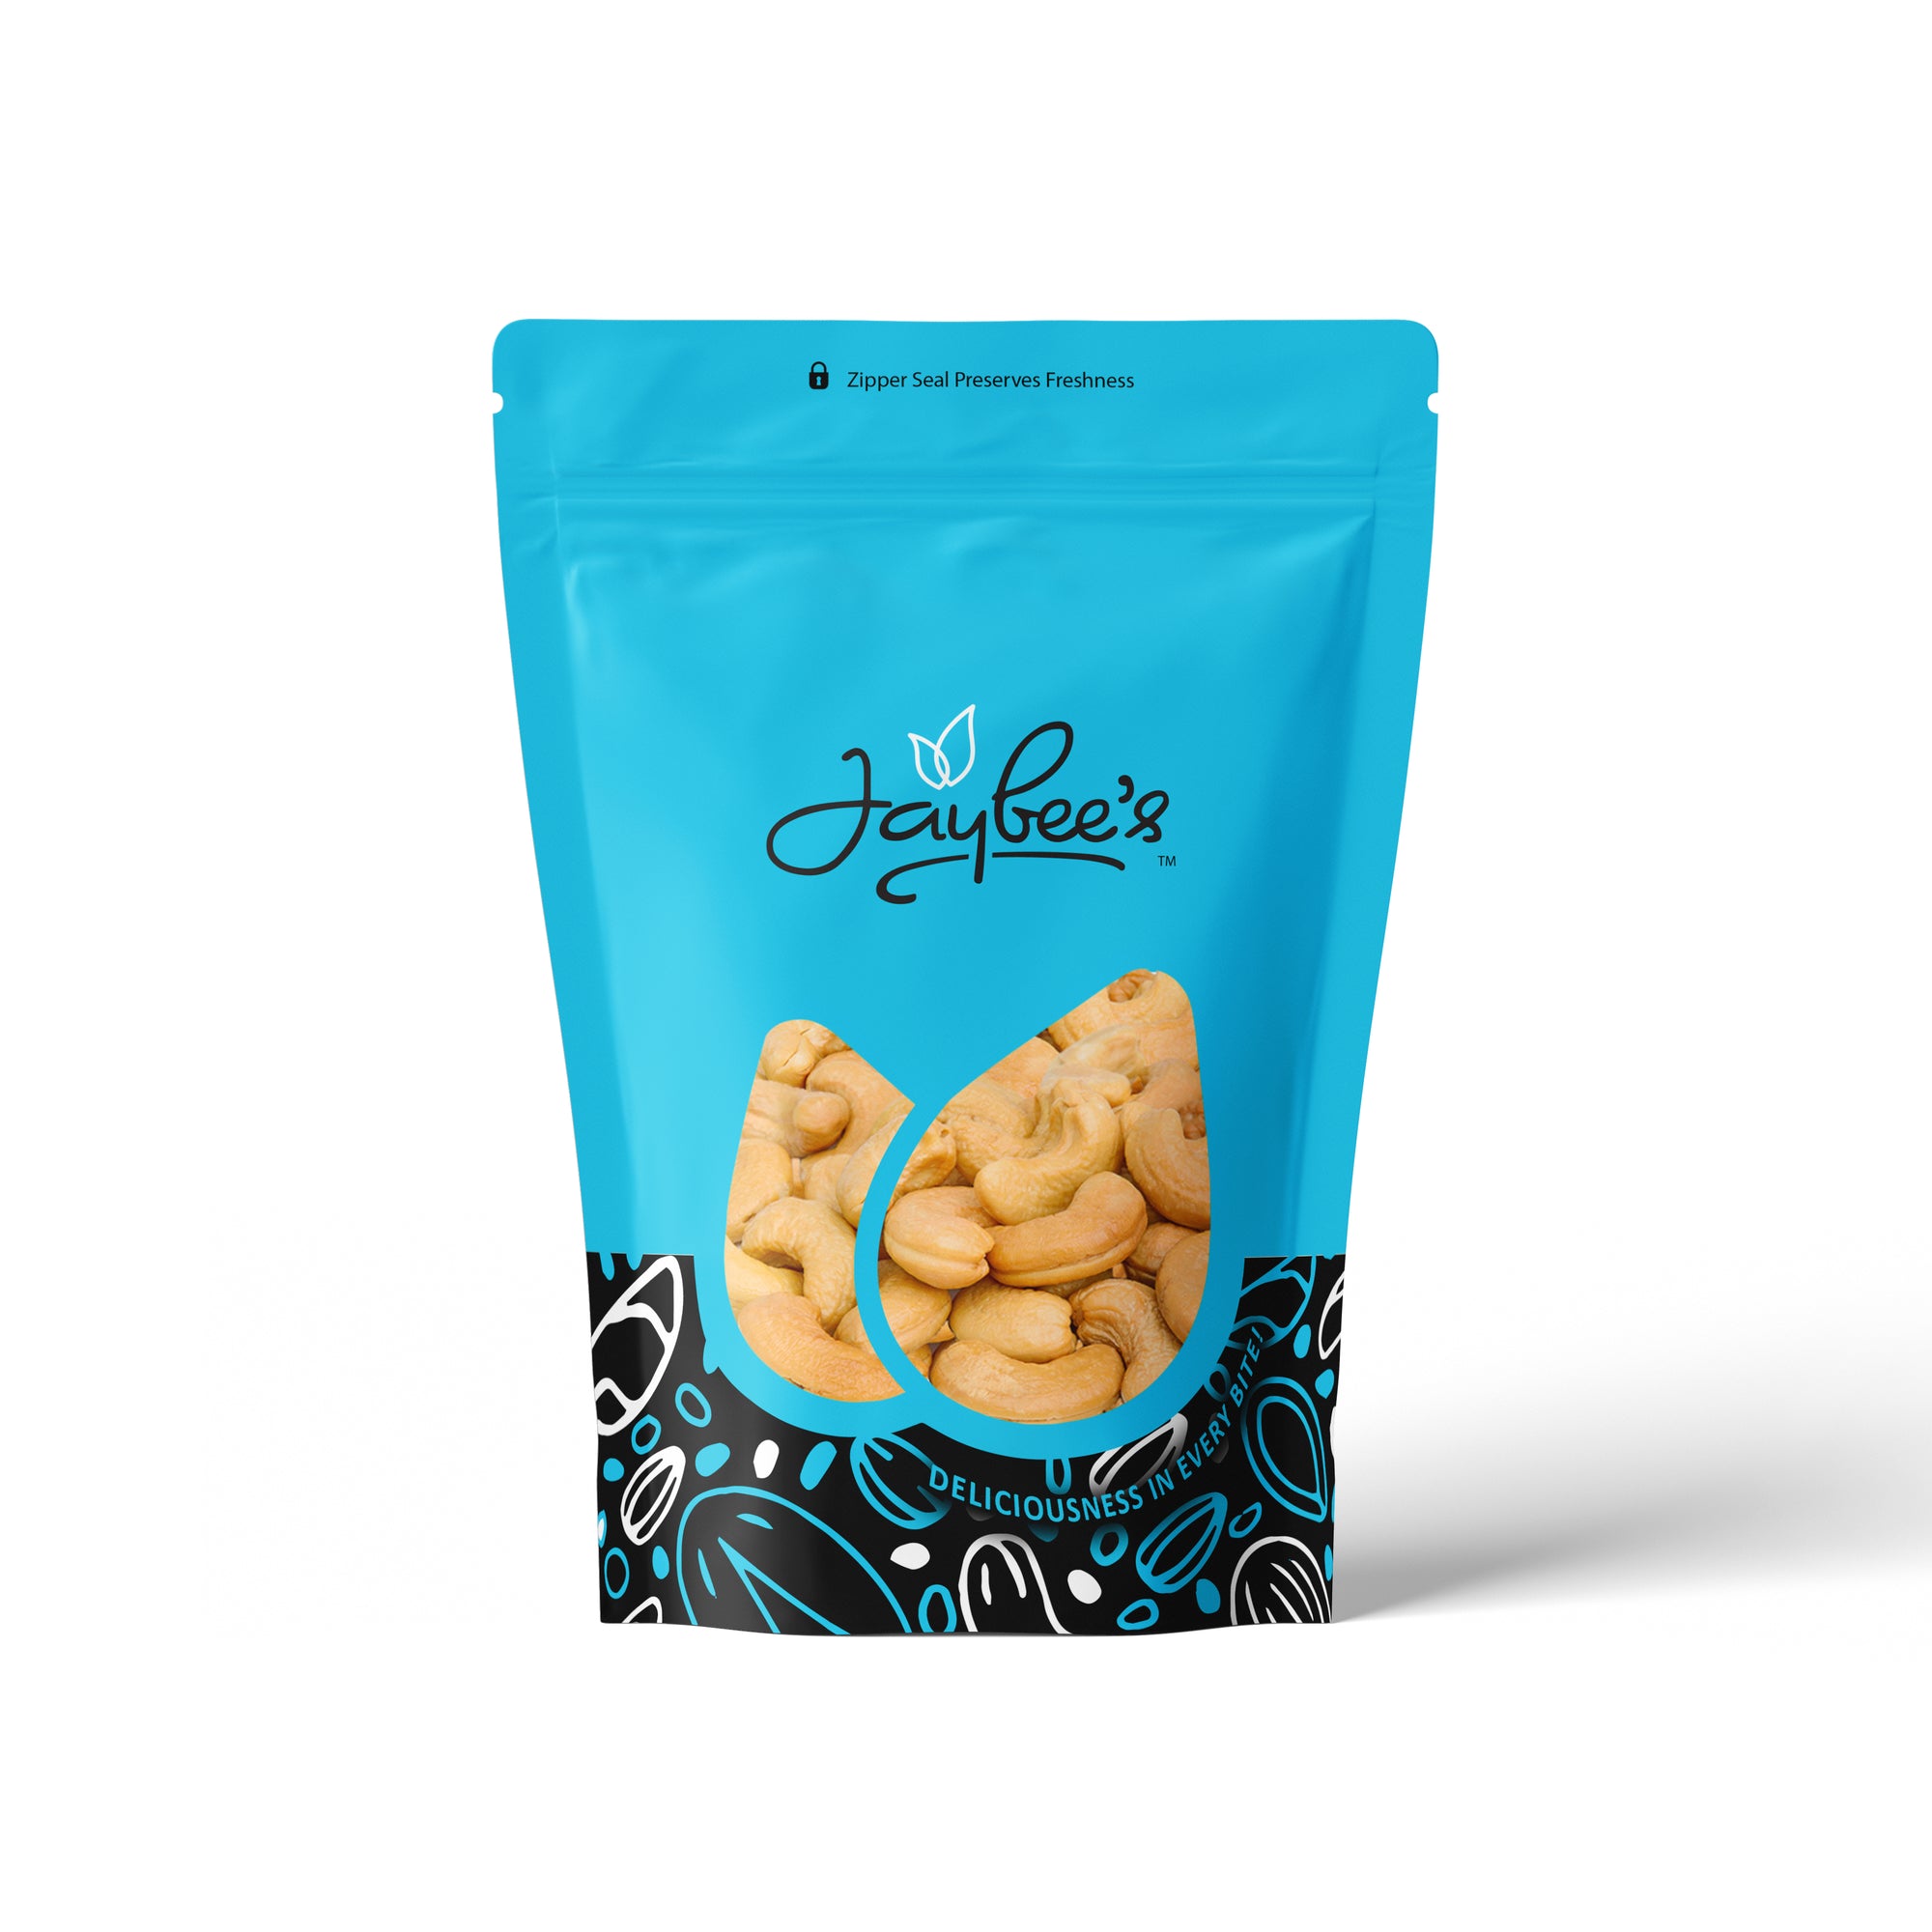 Cashews - Roasted & Unsalted